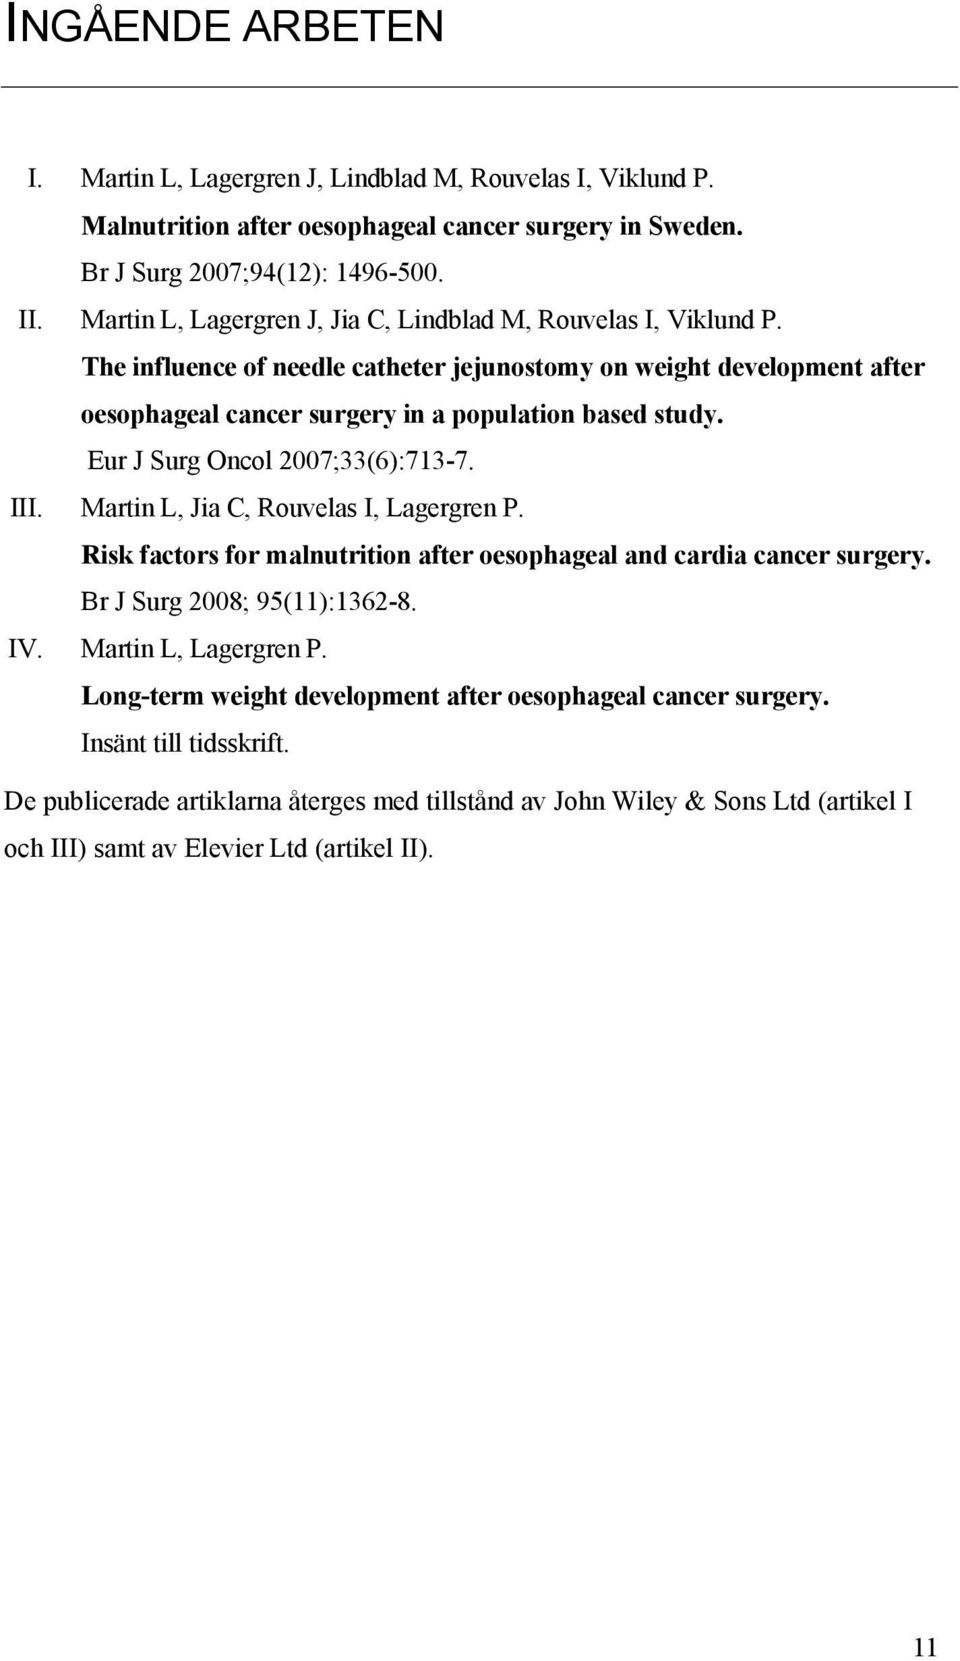 Eur J Surg Oncol 2007;33(6):713-7. III. Martin L, Jia C, Rouvelas I, Lagergren P. Risk factors for malnutrition after oesophageal and cardia cancer surgery. Br J Surg 2008; 95(11):1362-8. IV.